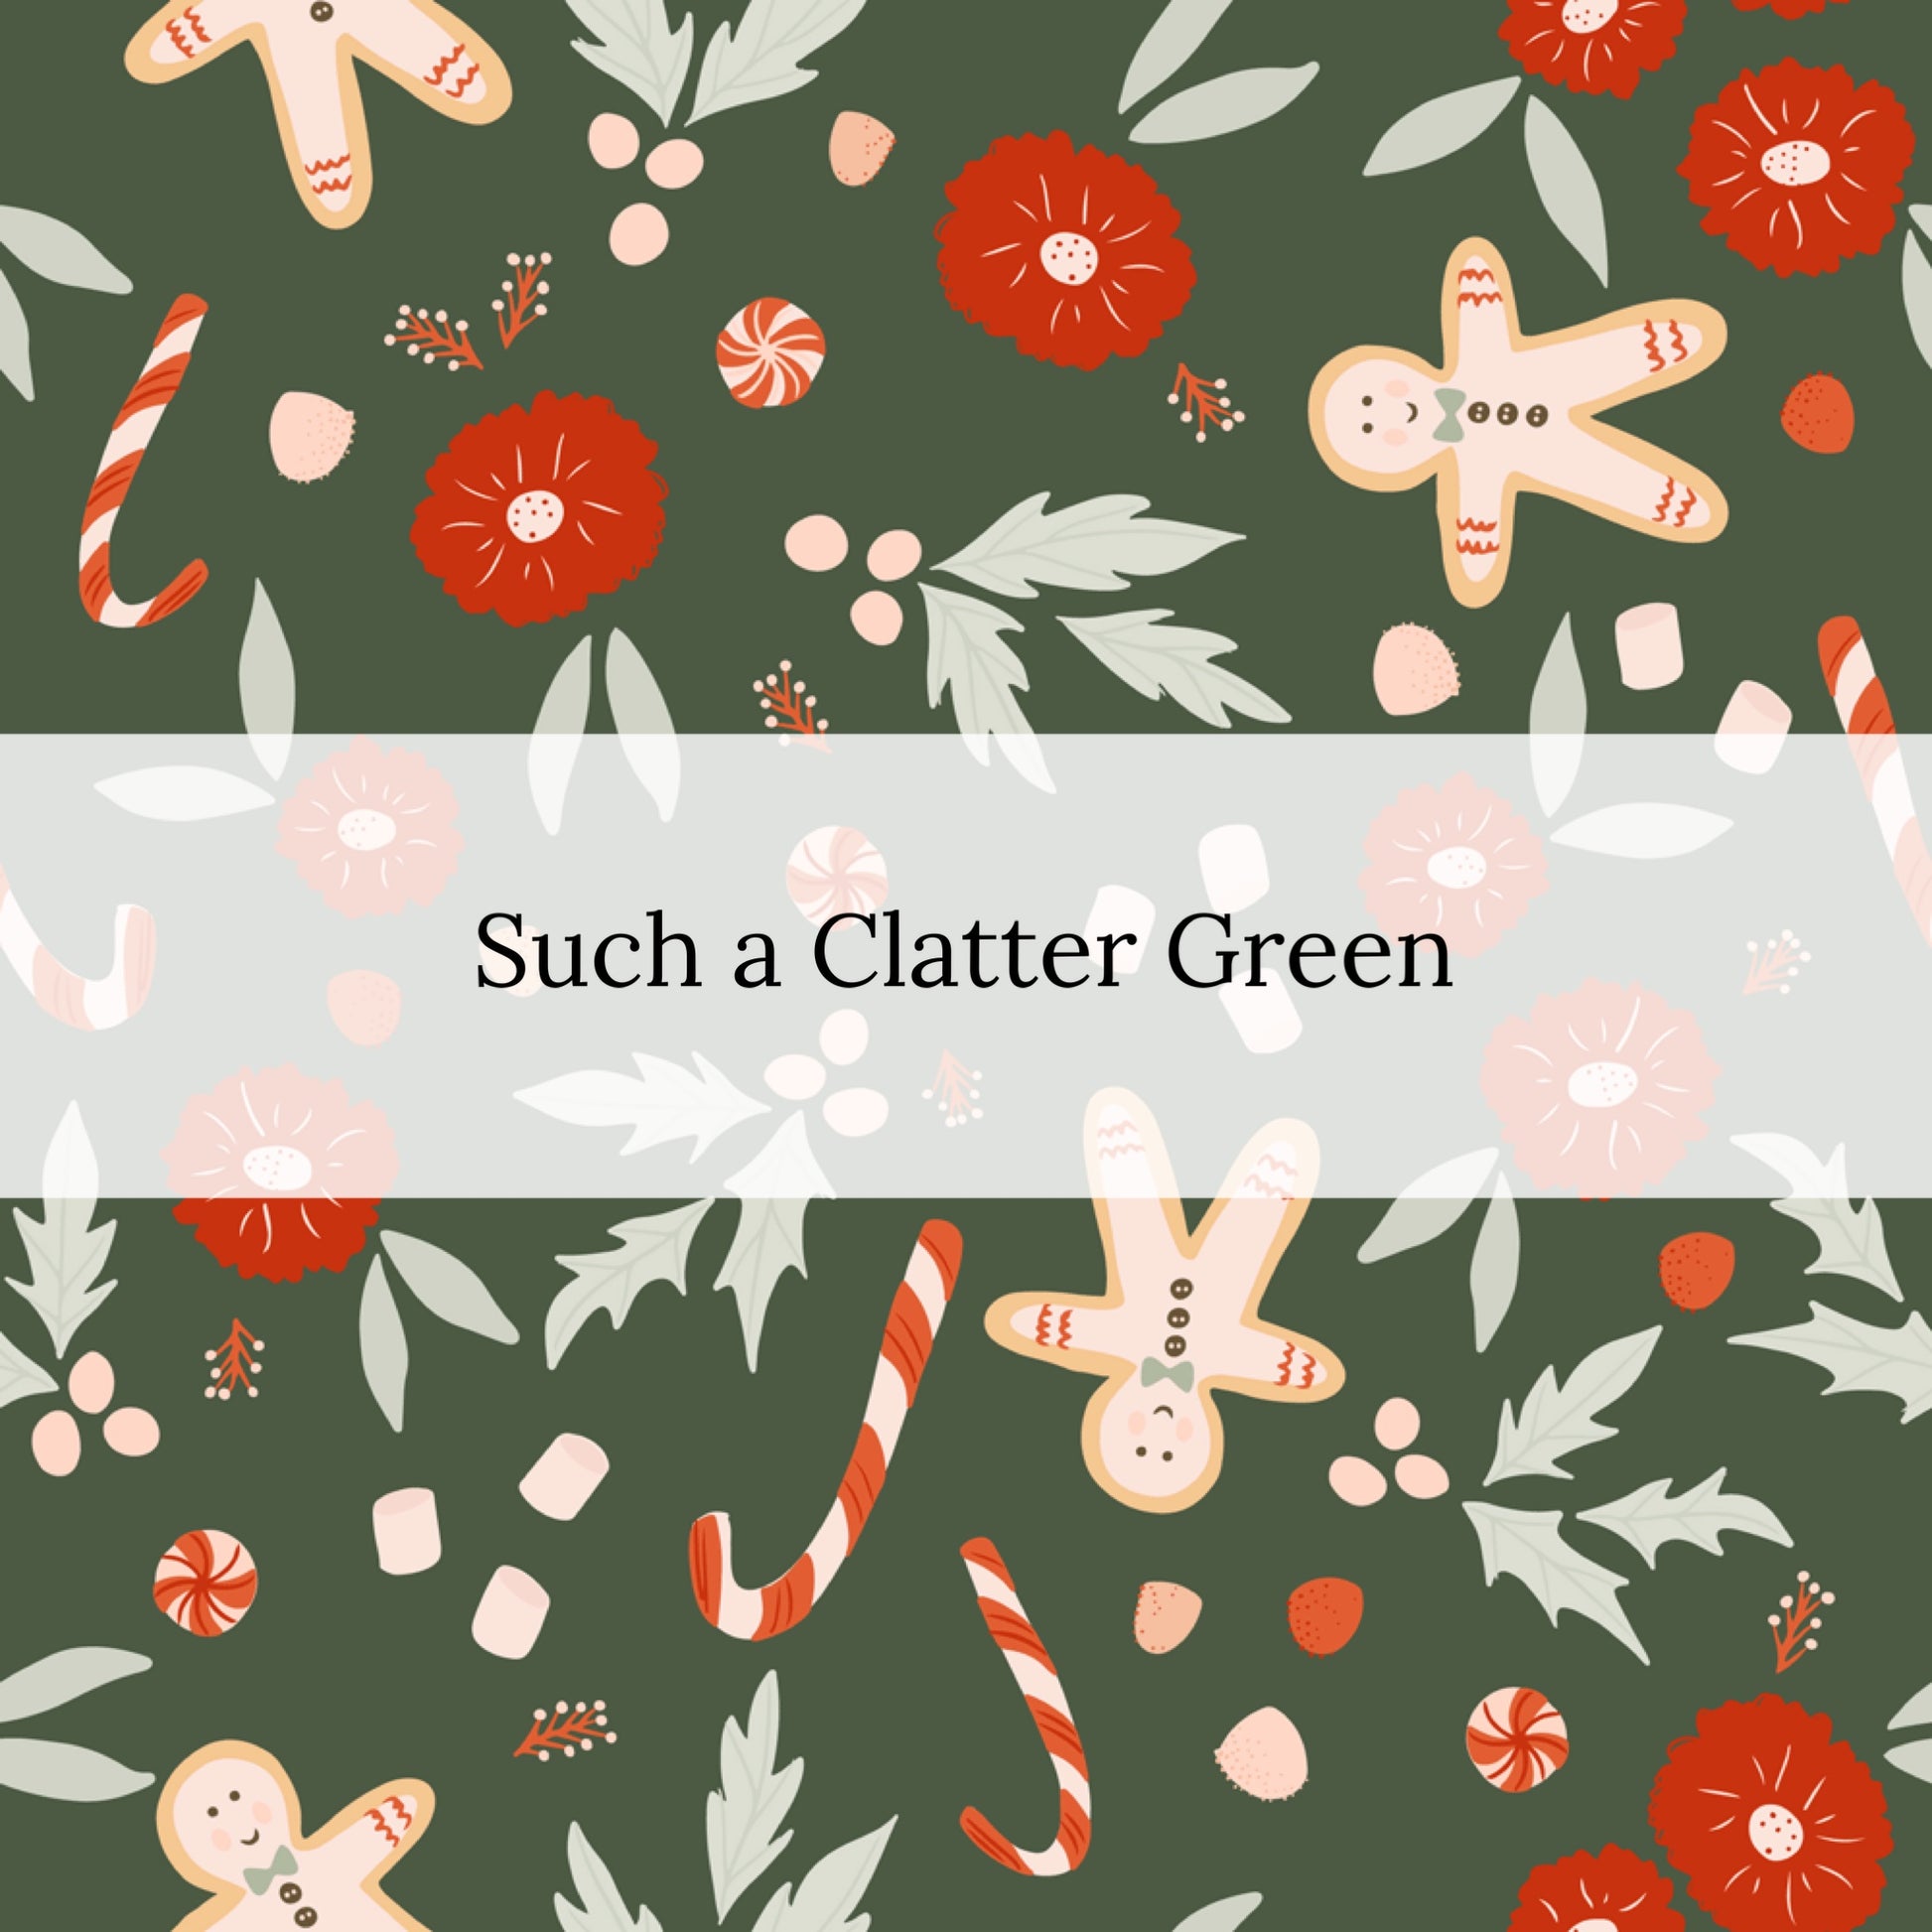 Green background with candy canes marshmallows and gingerbread men illustrations